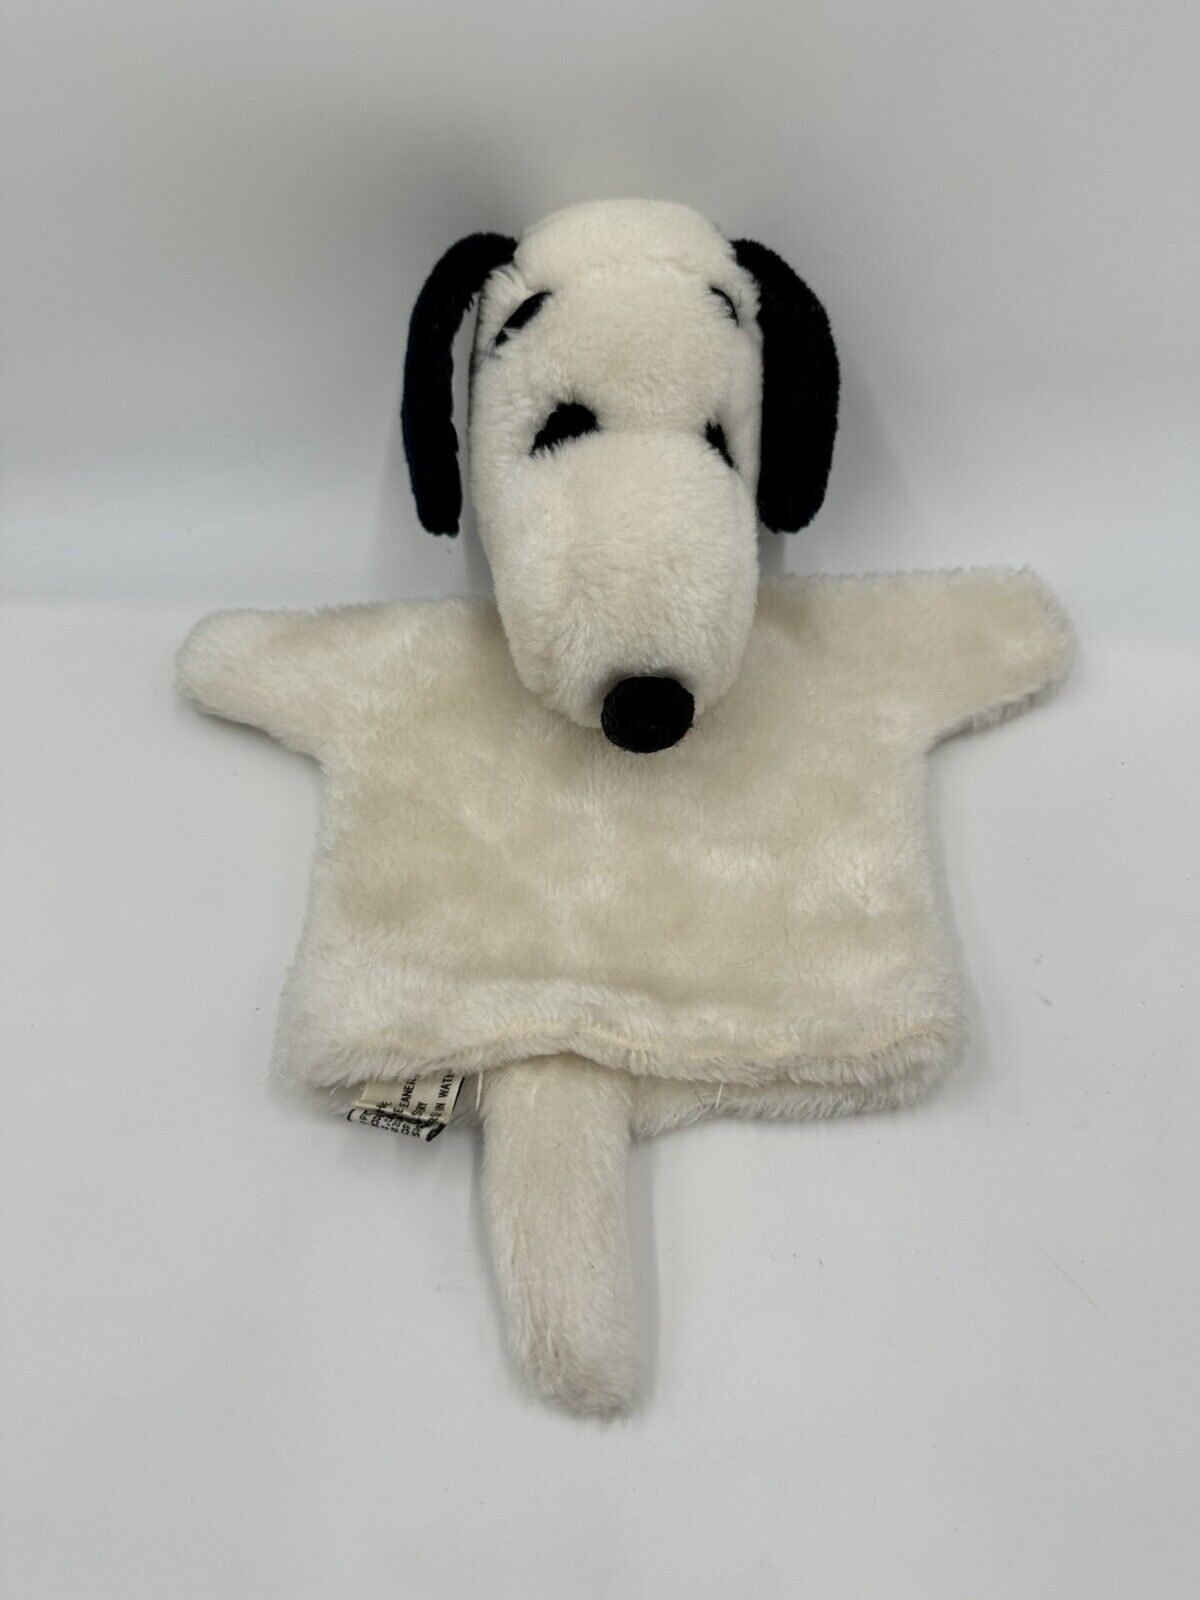 Vintage 1970s Determined Peanuts Snoopy Plush 9” Hand Puppet With Collar